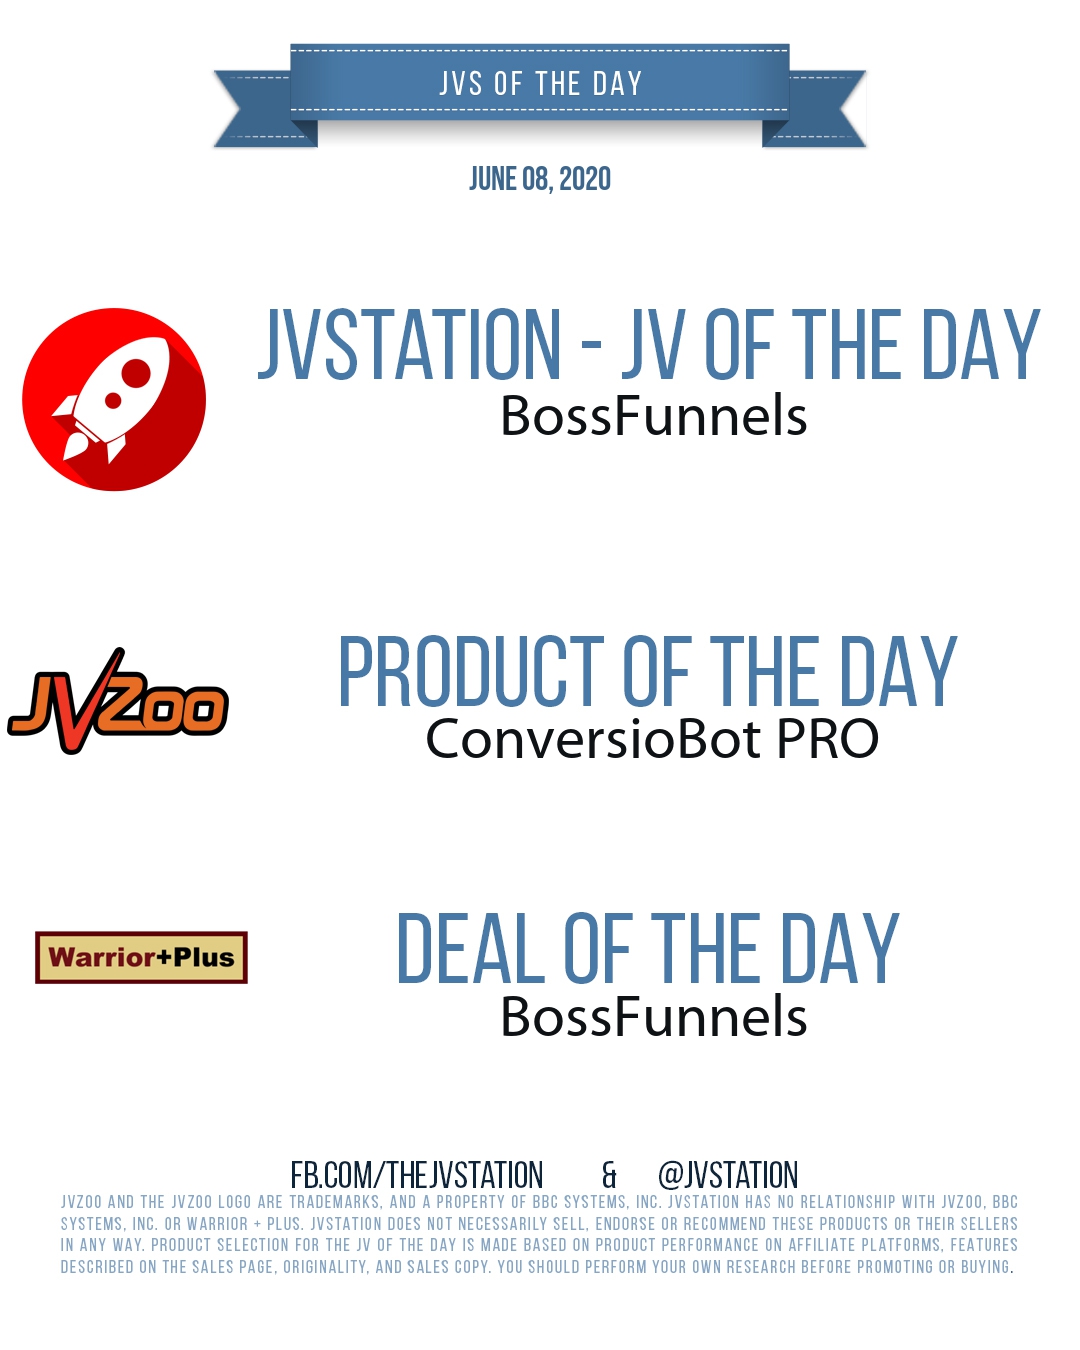 JVs of the day - June 08, 2020